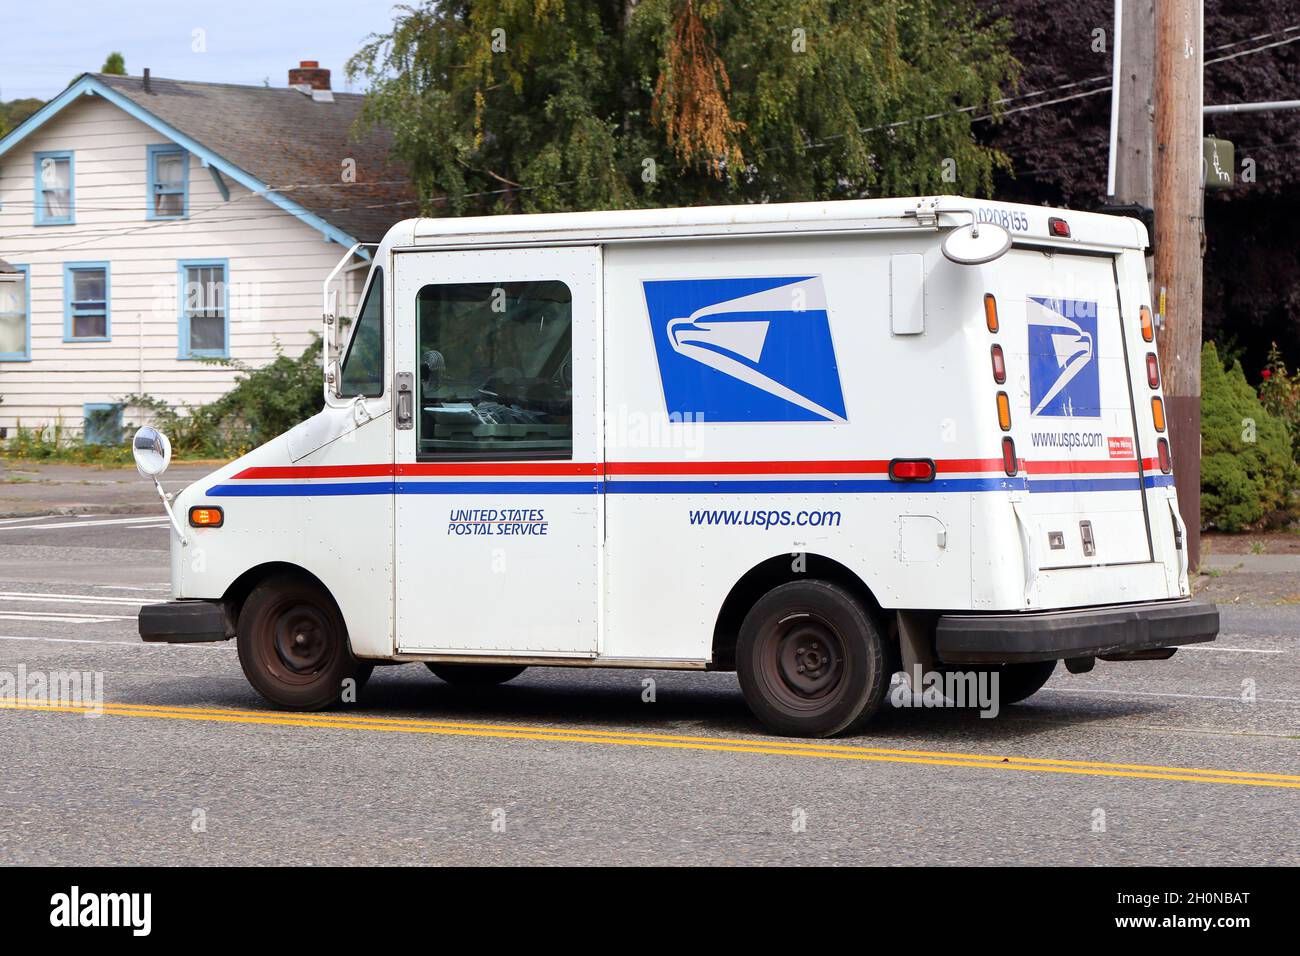 A Grumman Long Live Vehicle being used as a US Mail delivery truck on a street. Stock Photo